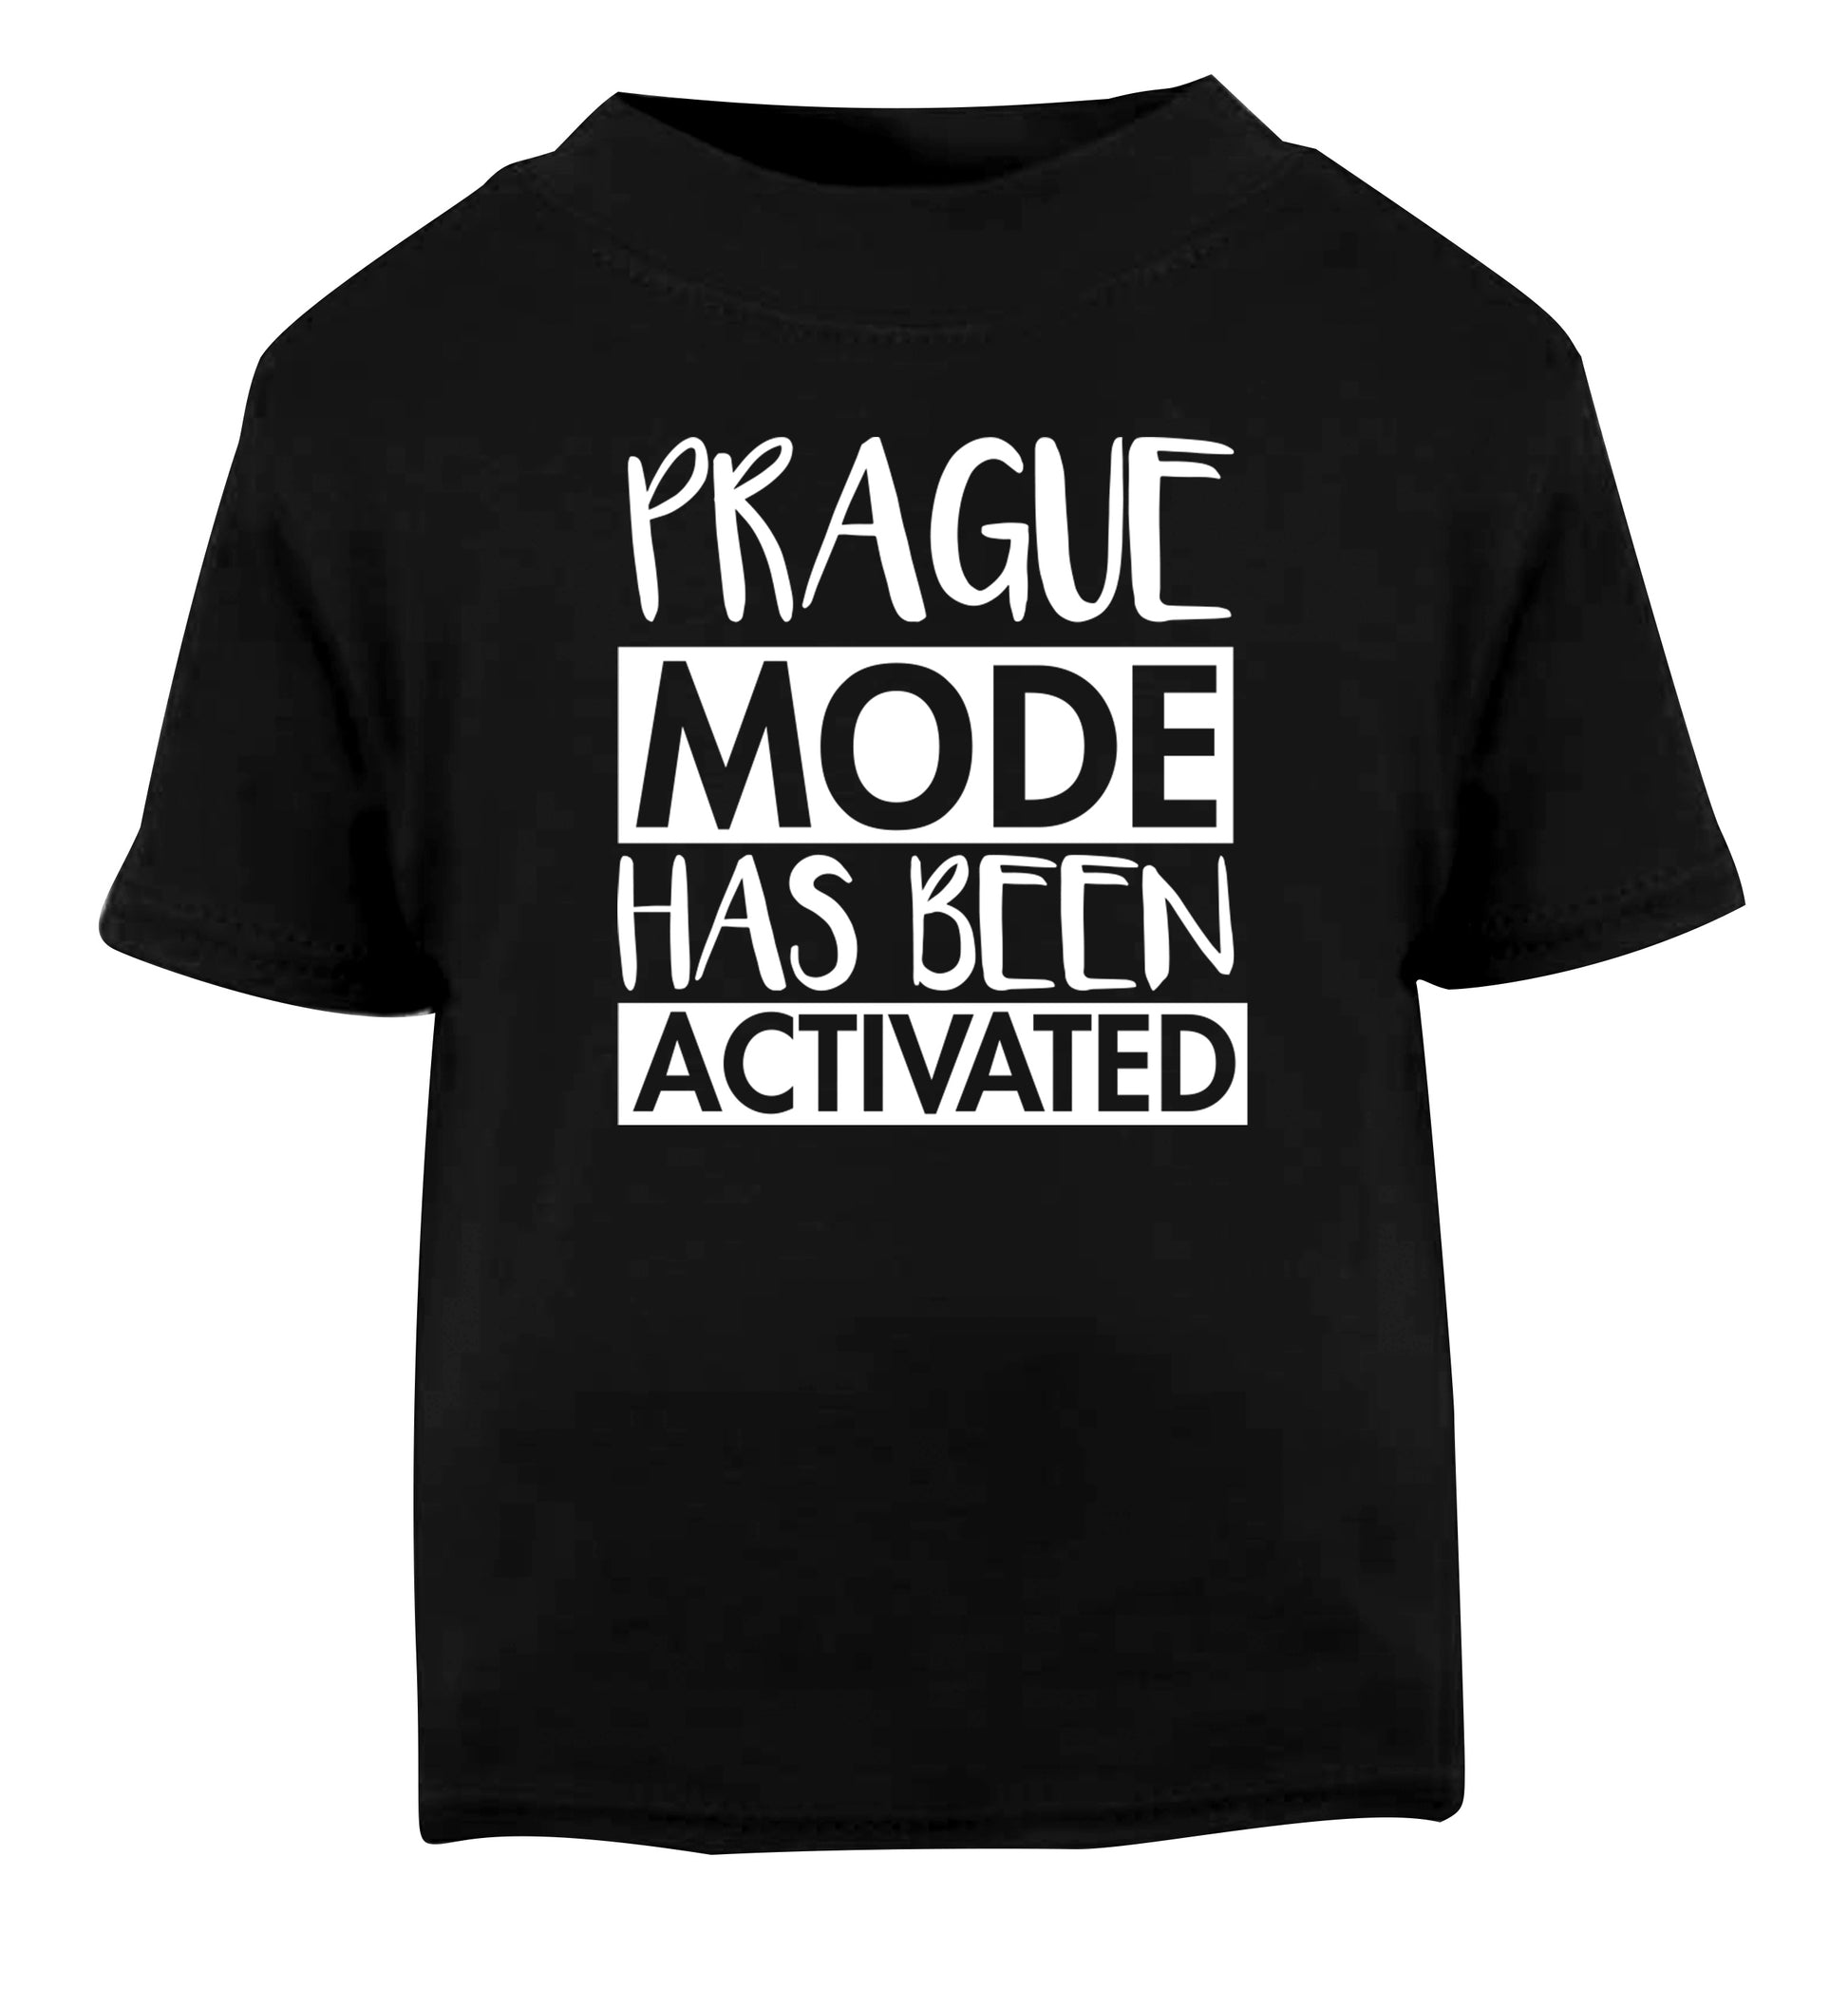 Prague mode has been activated Black Baby Toddler Tshirt 2 years